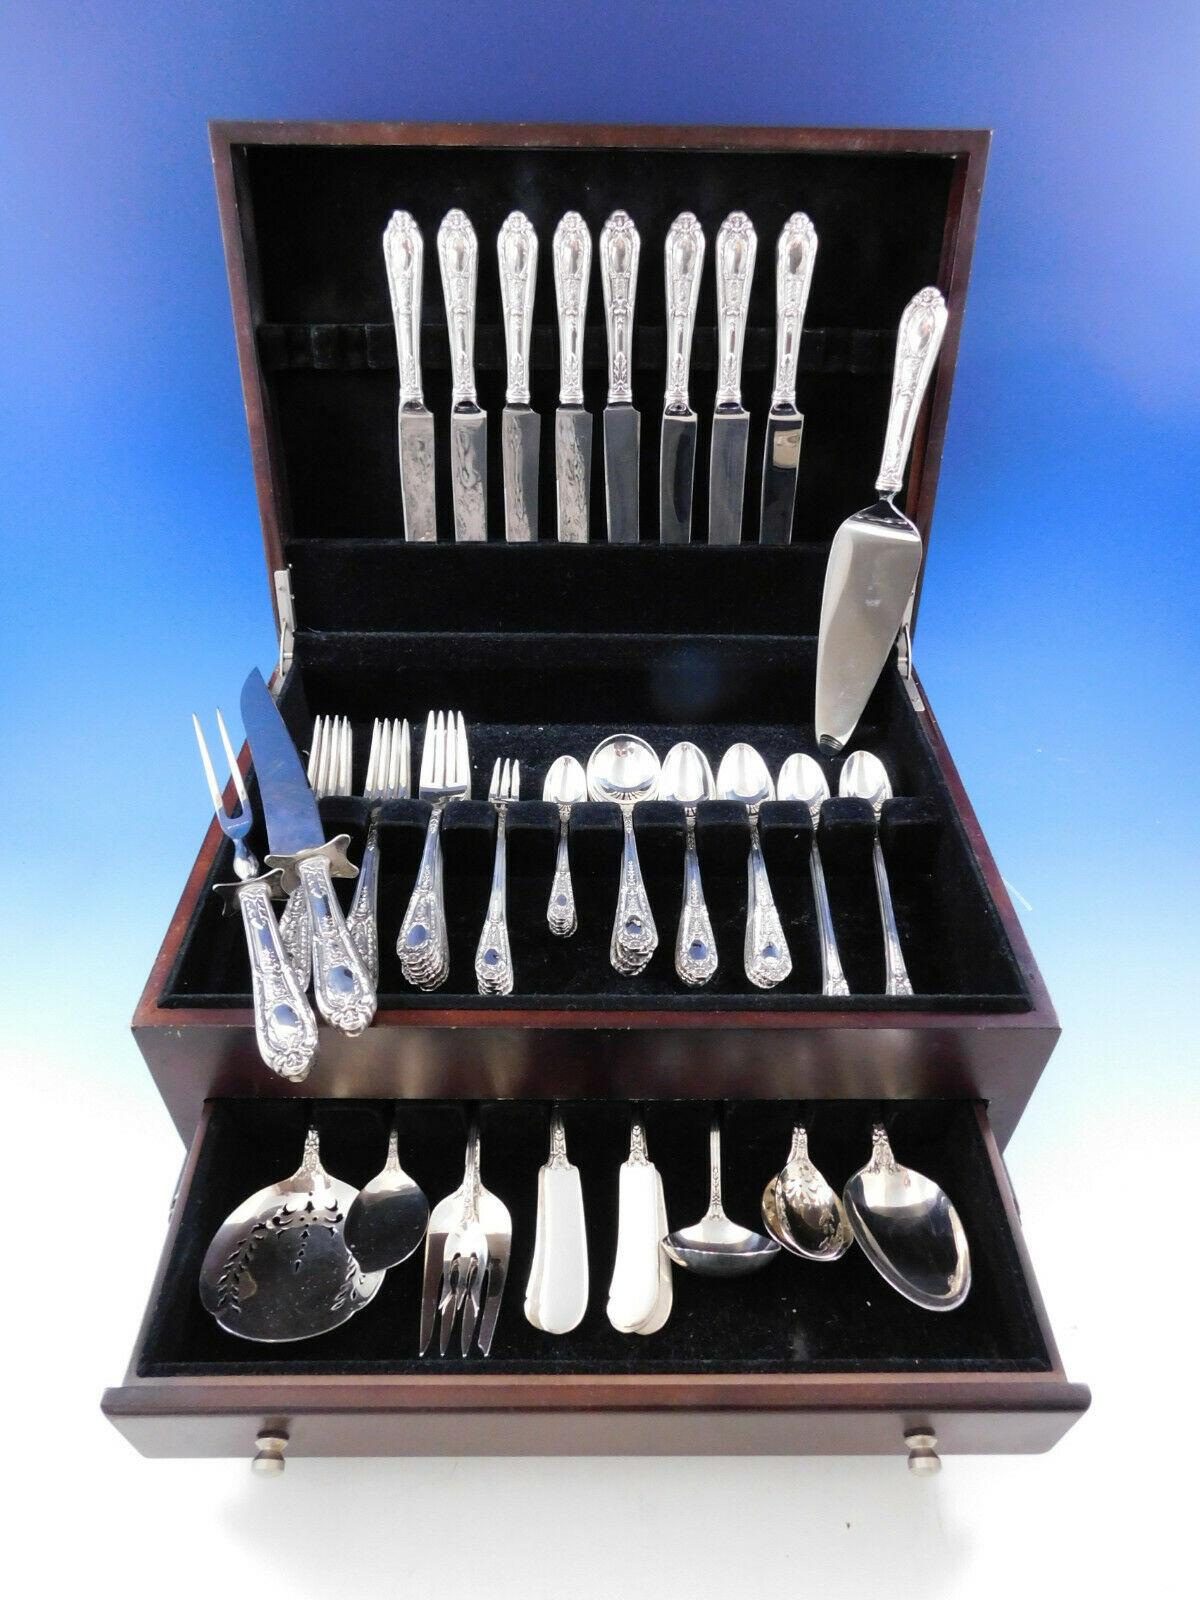 Superb Fontaine by International sterling silver flatware set - 83 pieces. This set includes:

8 knives, 9